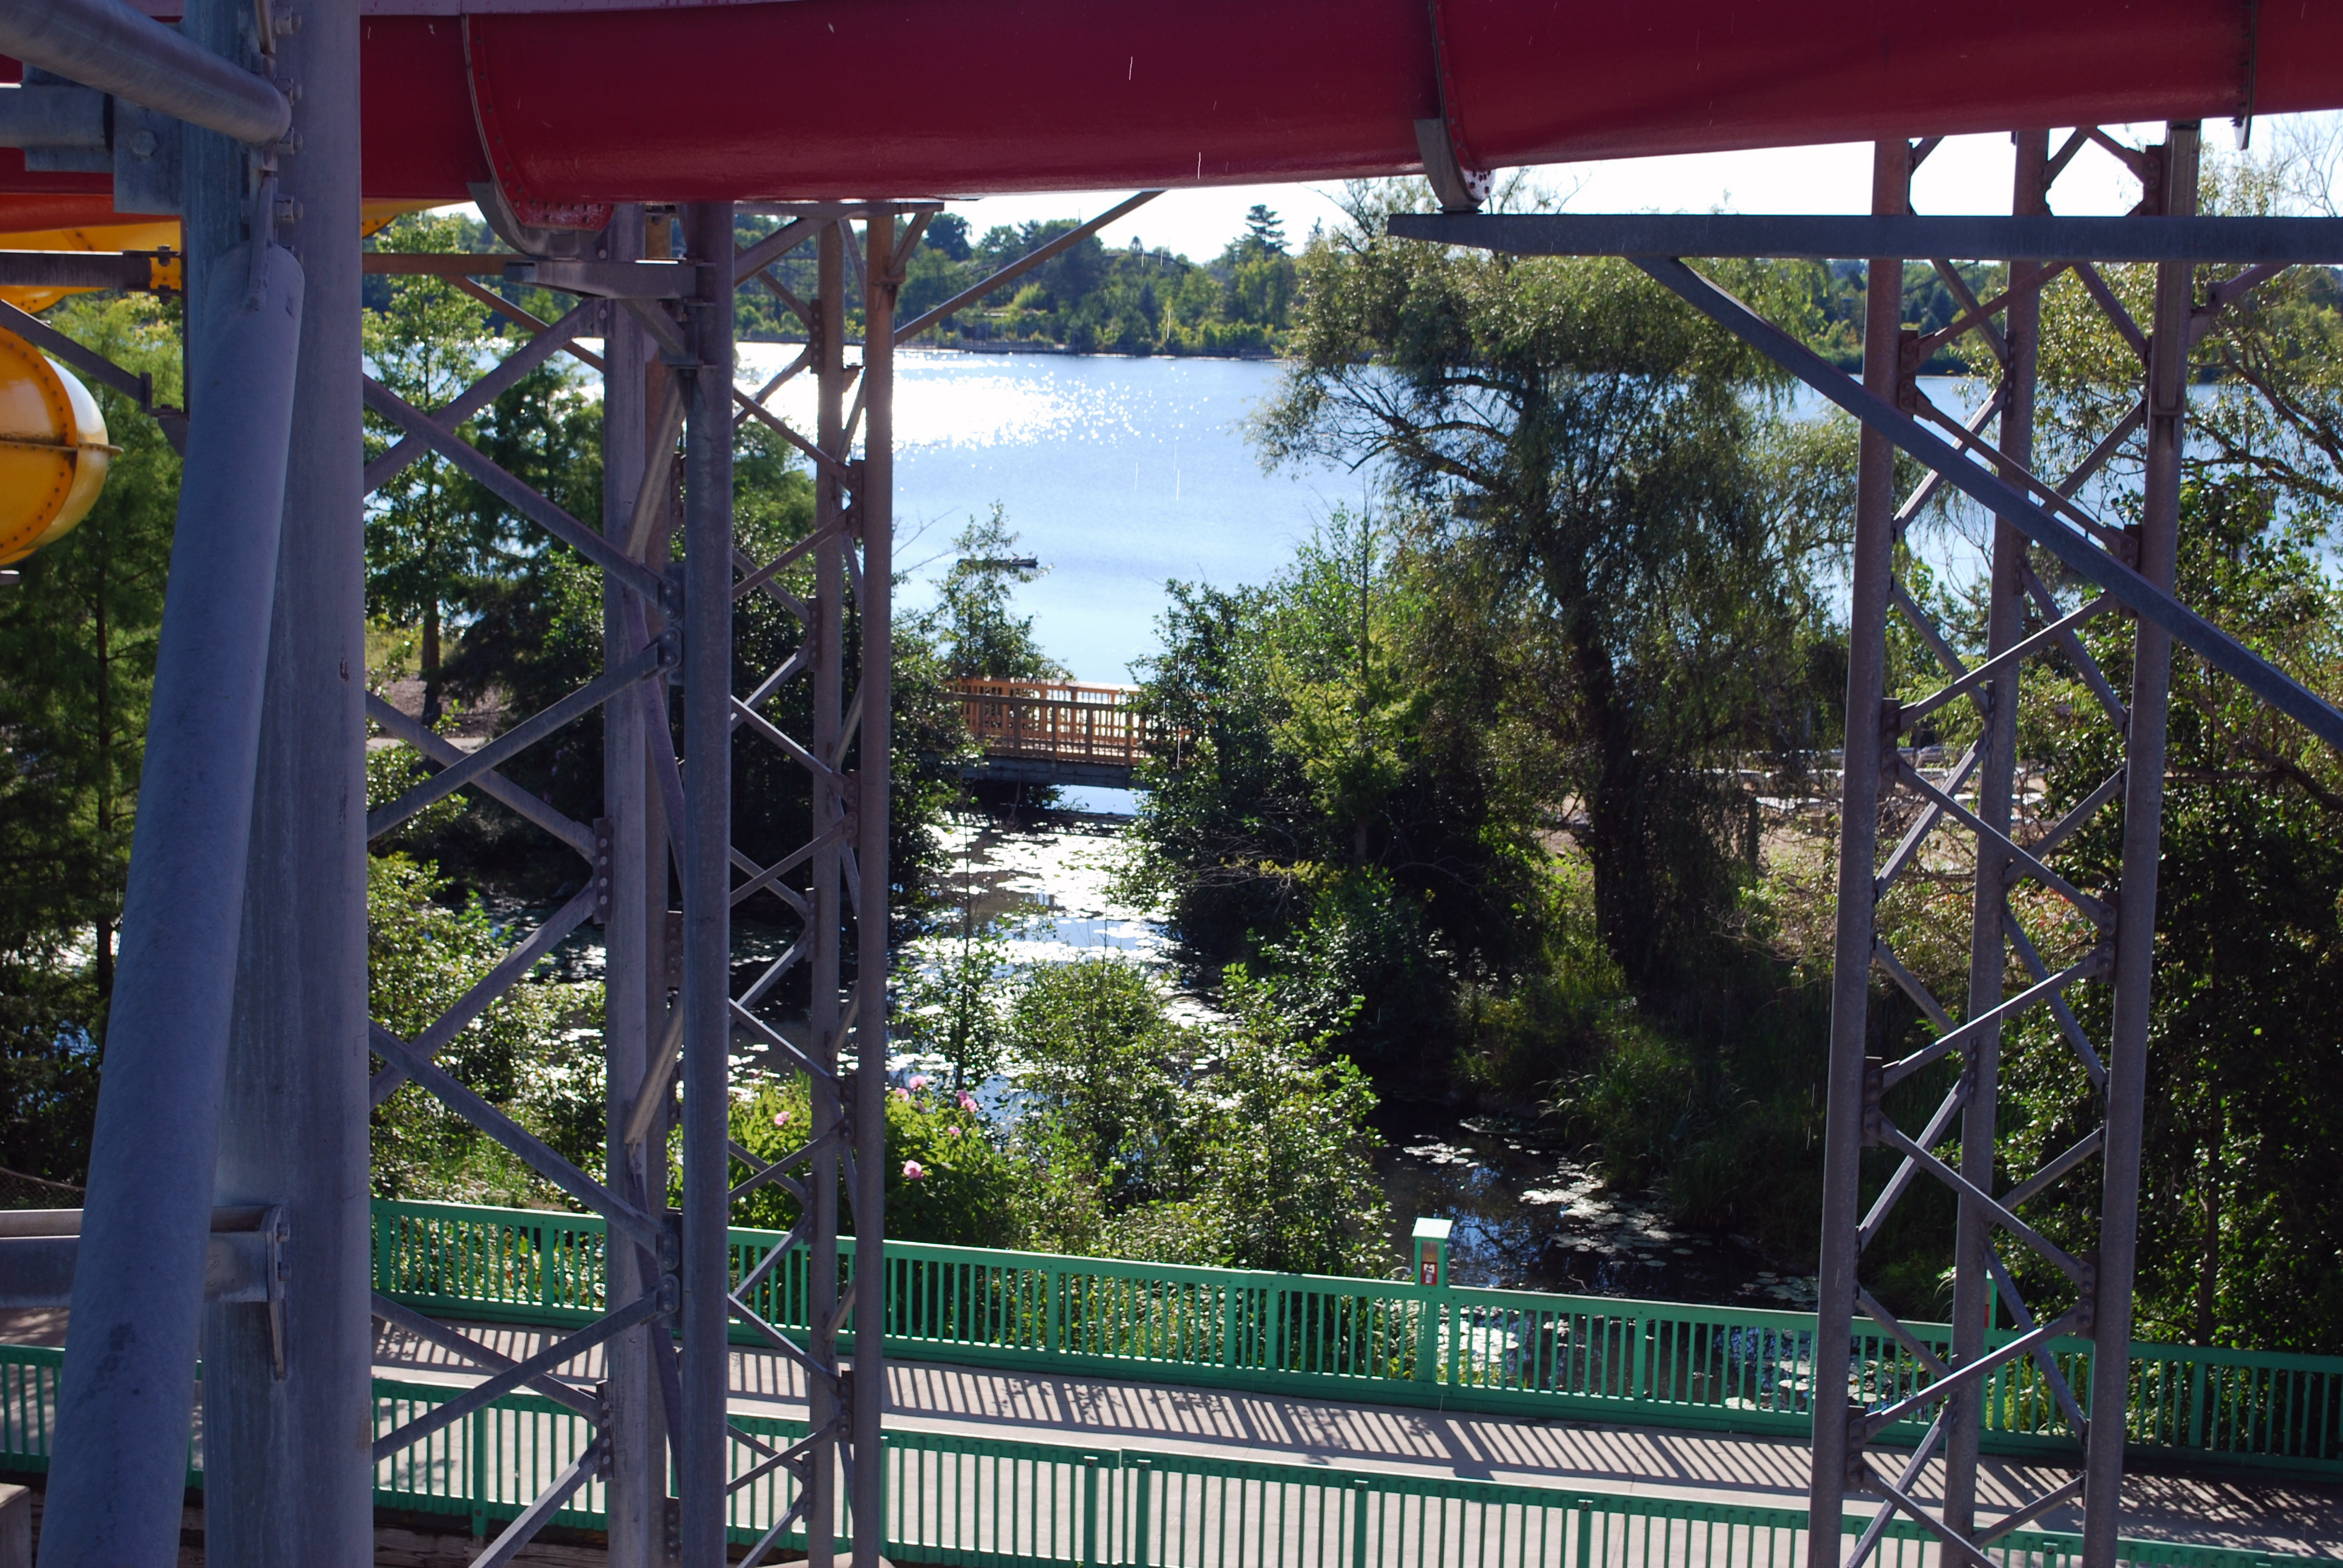 View of Lake Geauga from waterslide tower